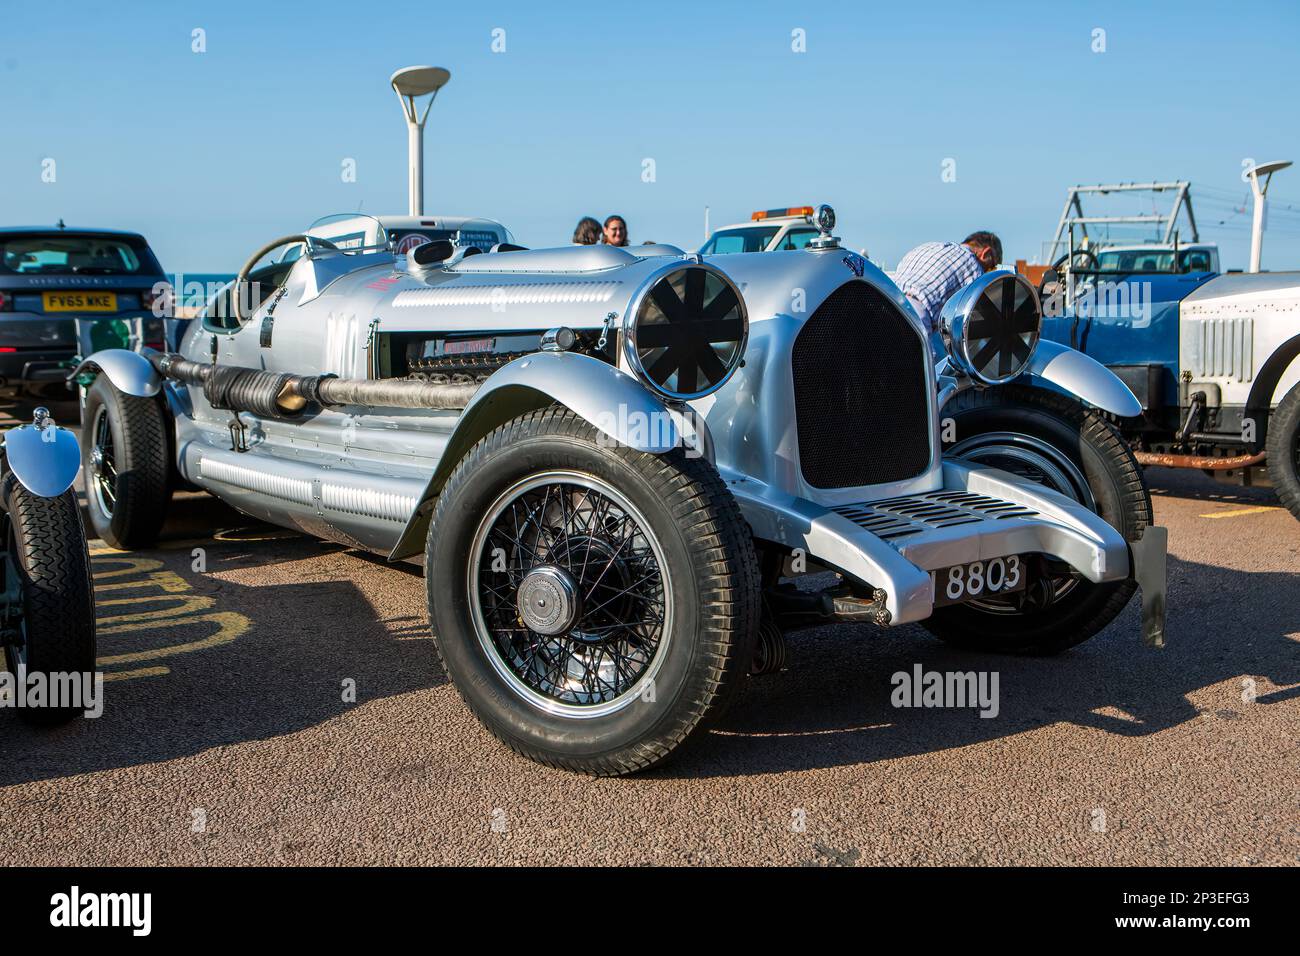 1930 Rolls Royce Handlye Special at The Brighton National Speed Trials 2018. This is the oldest motor racing event in the UK and is held in the south east coastal town of Brighton. Madeira drive is a road which runs along the seafront and is normal full of people explorer the beach, pier and local attractions. Today it is turned in to a 1/4 time trial course. 2nd September 2018 Stock Photo